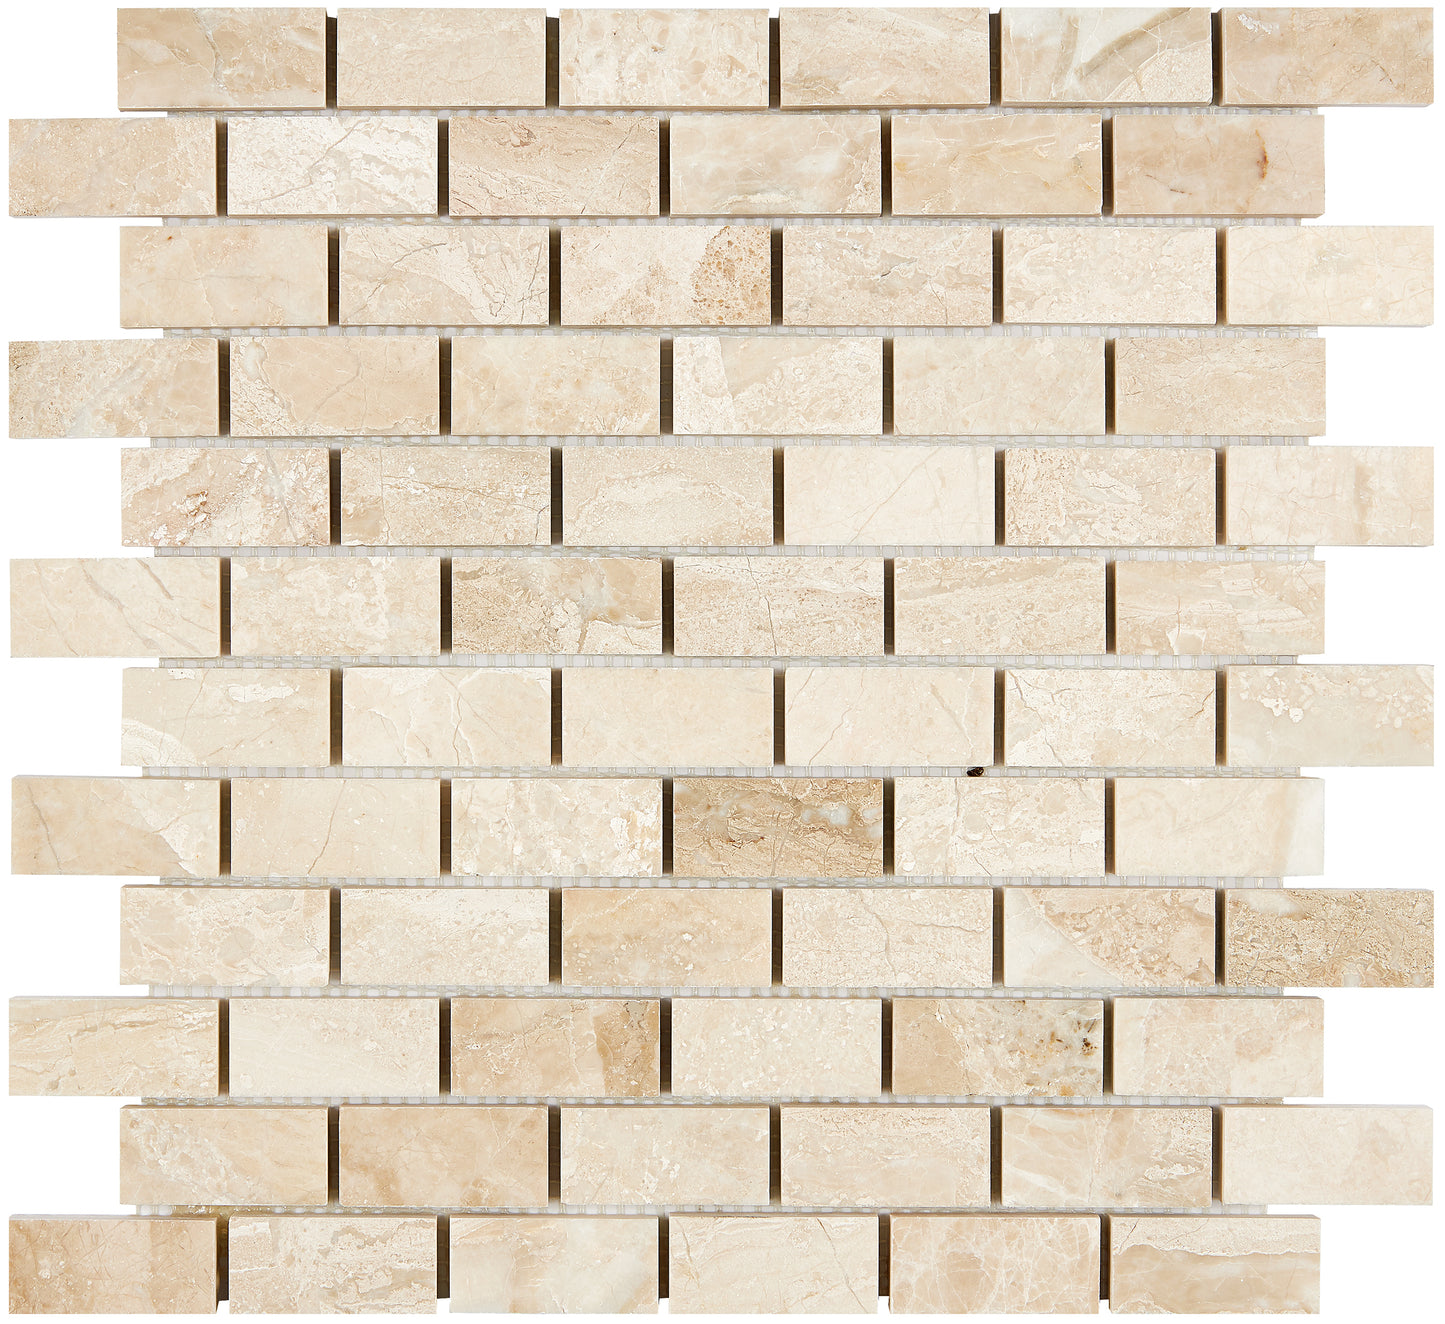 Diano Royal (Queen Beige) Marble 1" X 2" Brick Mosaic Polished/Split-Faced